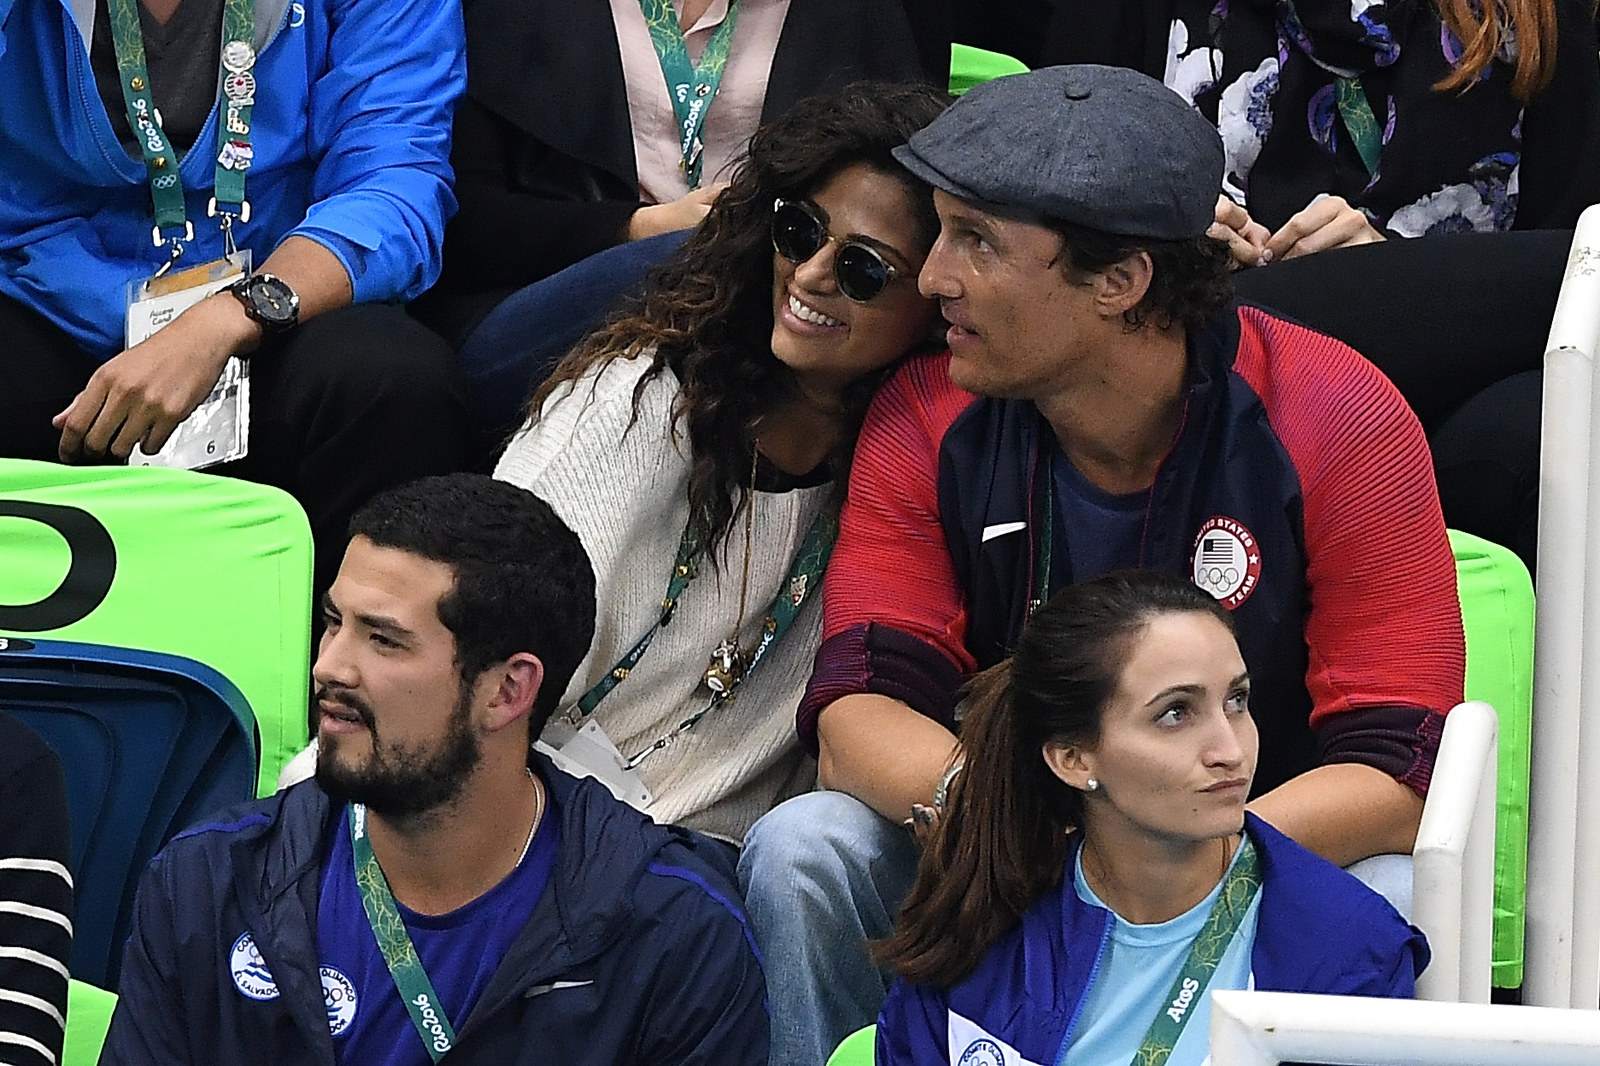 Matthew McConaughey Is Having The Time Of His Life Alone At The Olympics